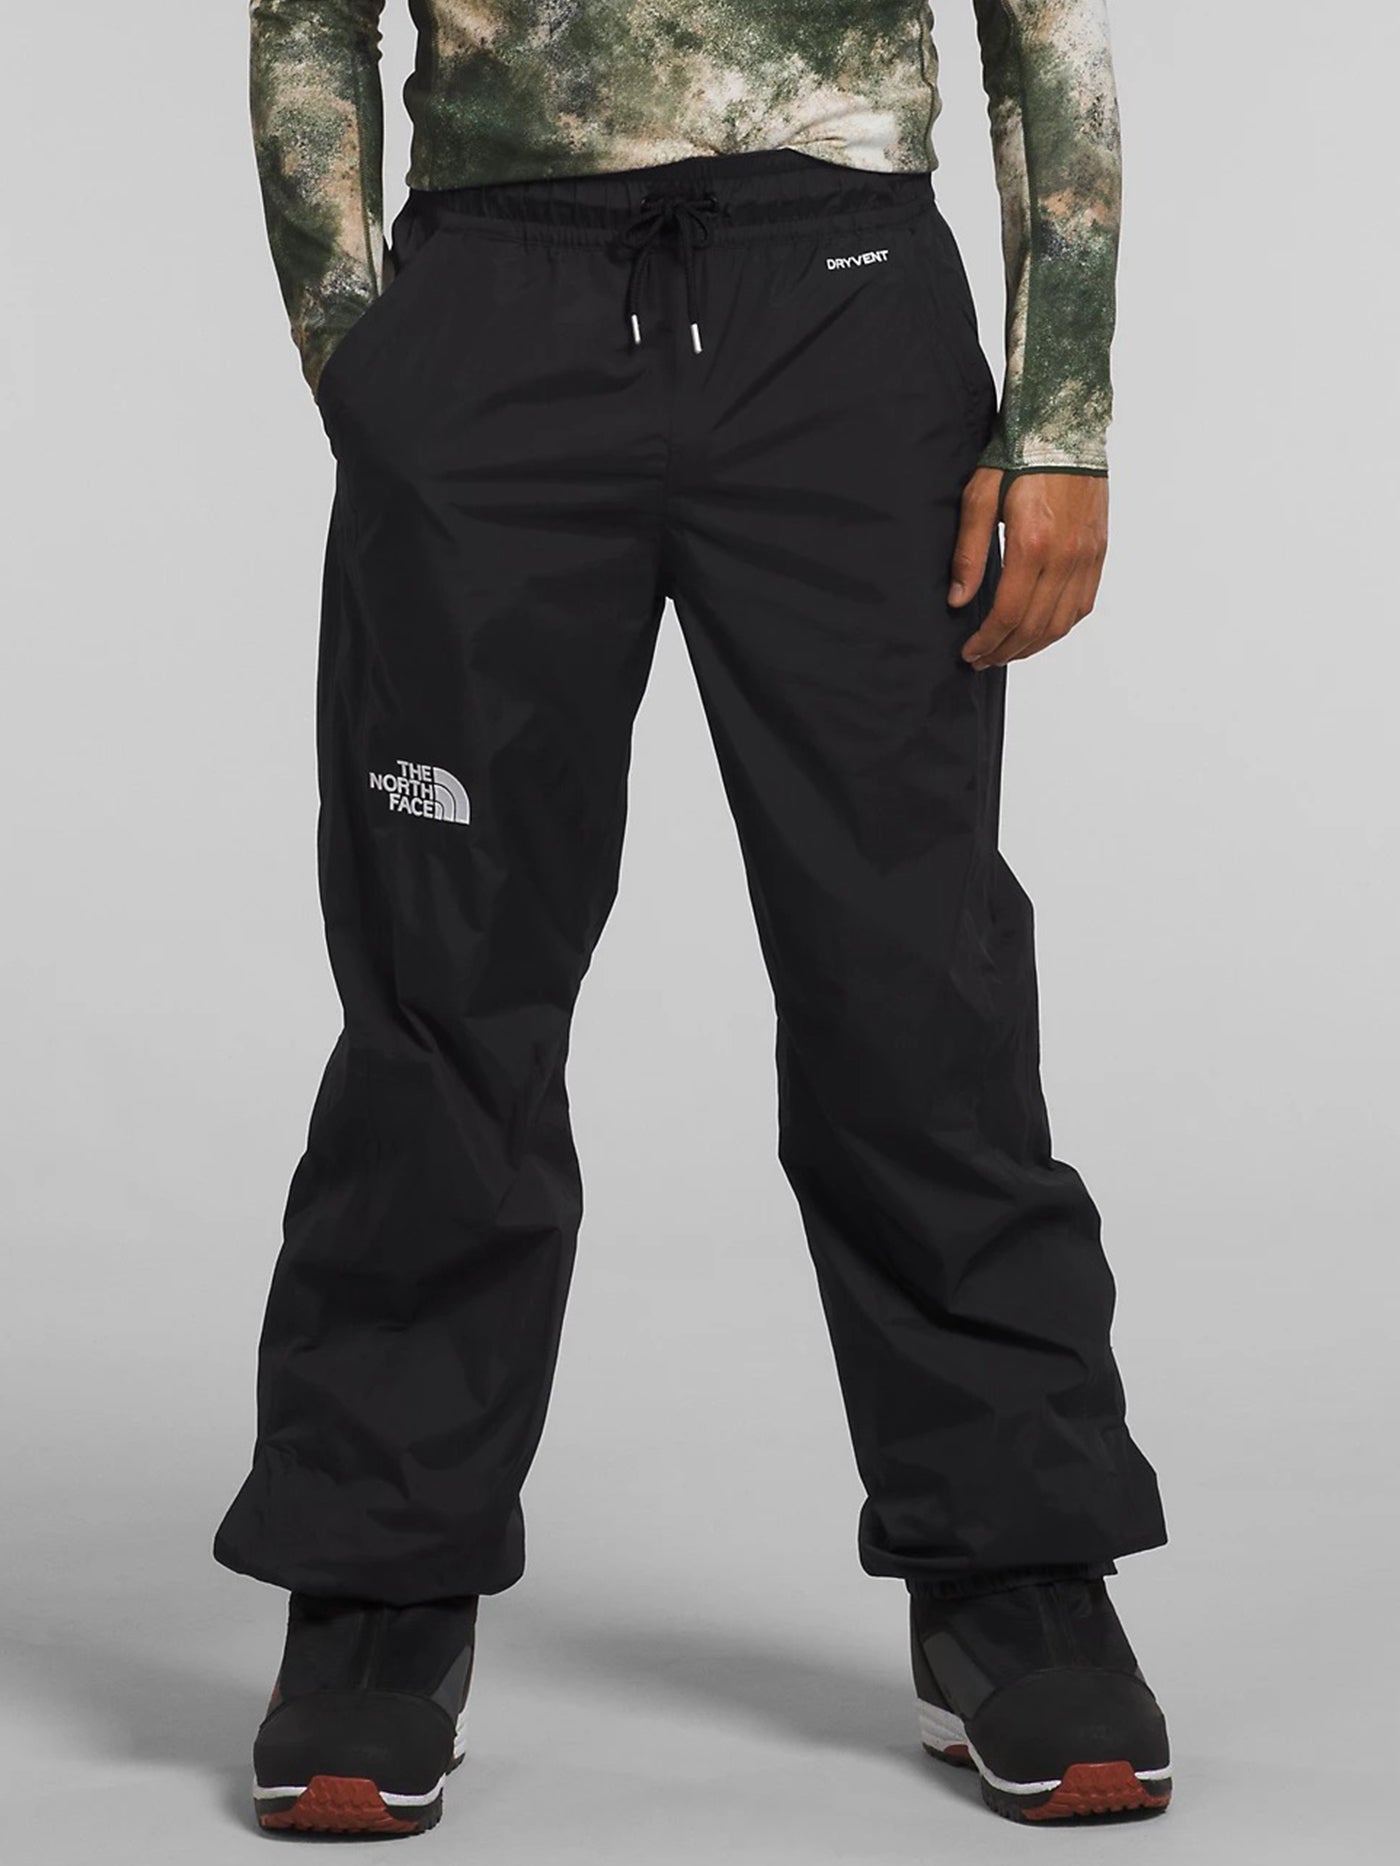 HyVent Snow pants by The North Face - Coats & jackets